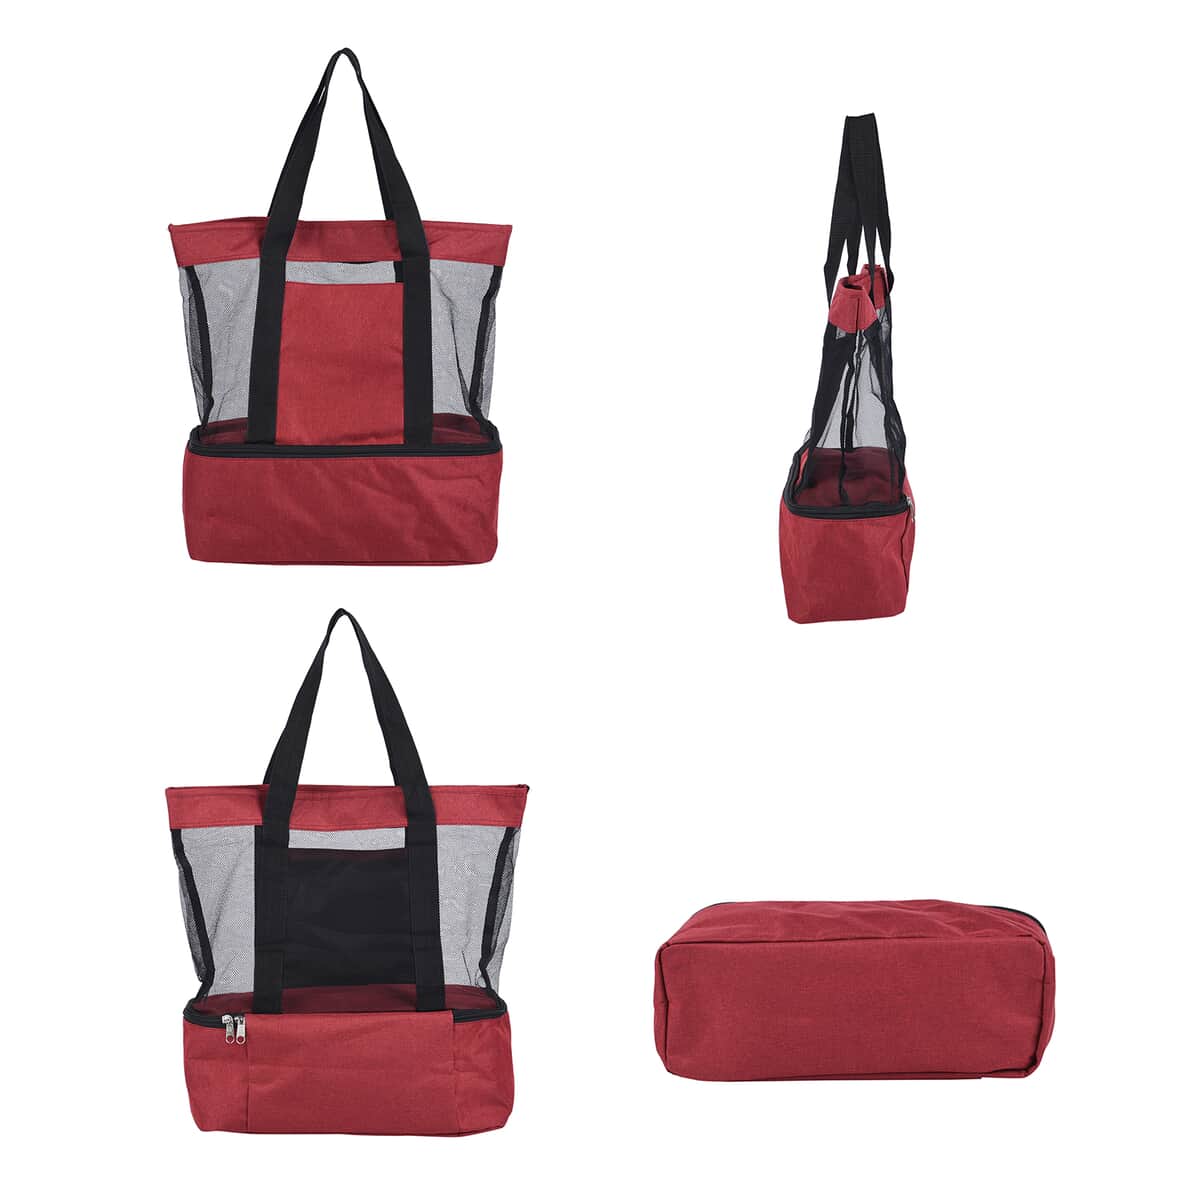 Wine Red Terylene 2 Tier Shopping Bag with Double Handles (14.57"x5.91"x16.54") image number 3